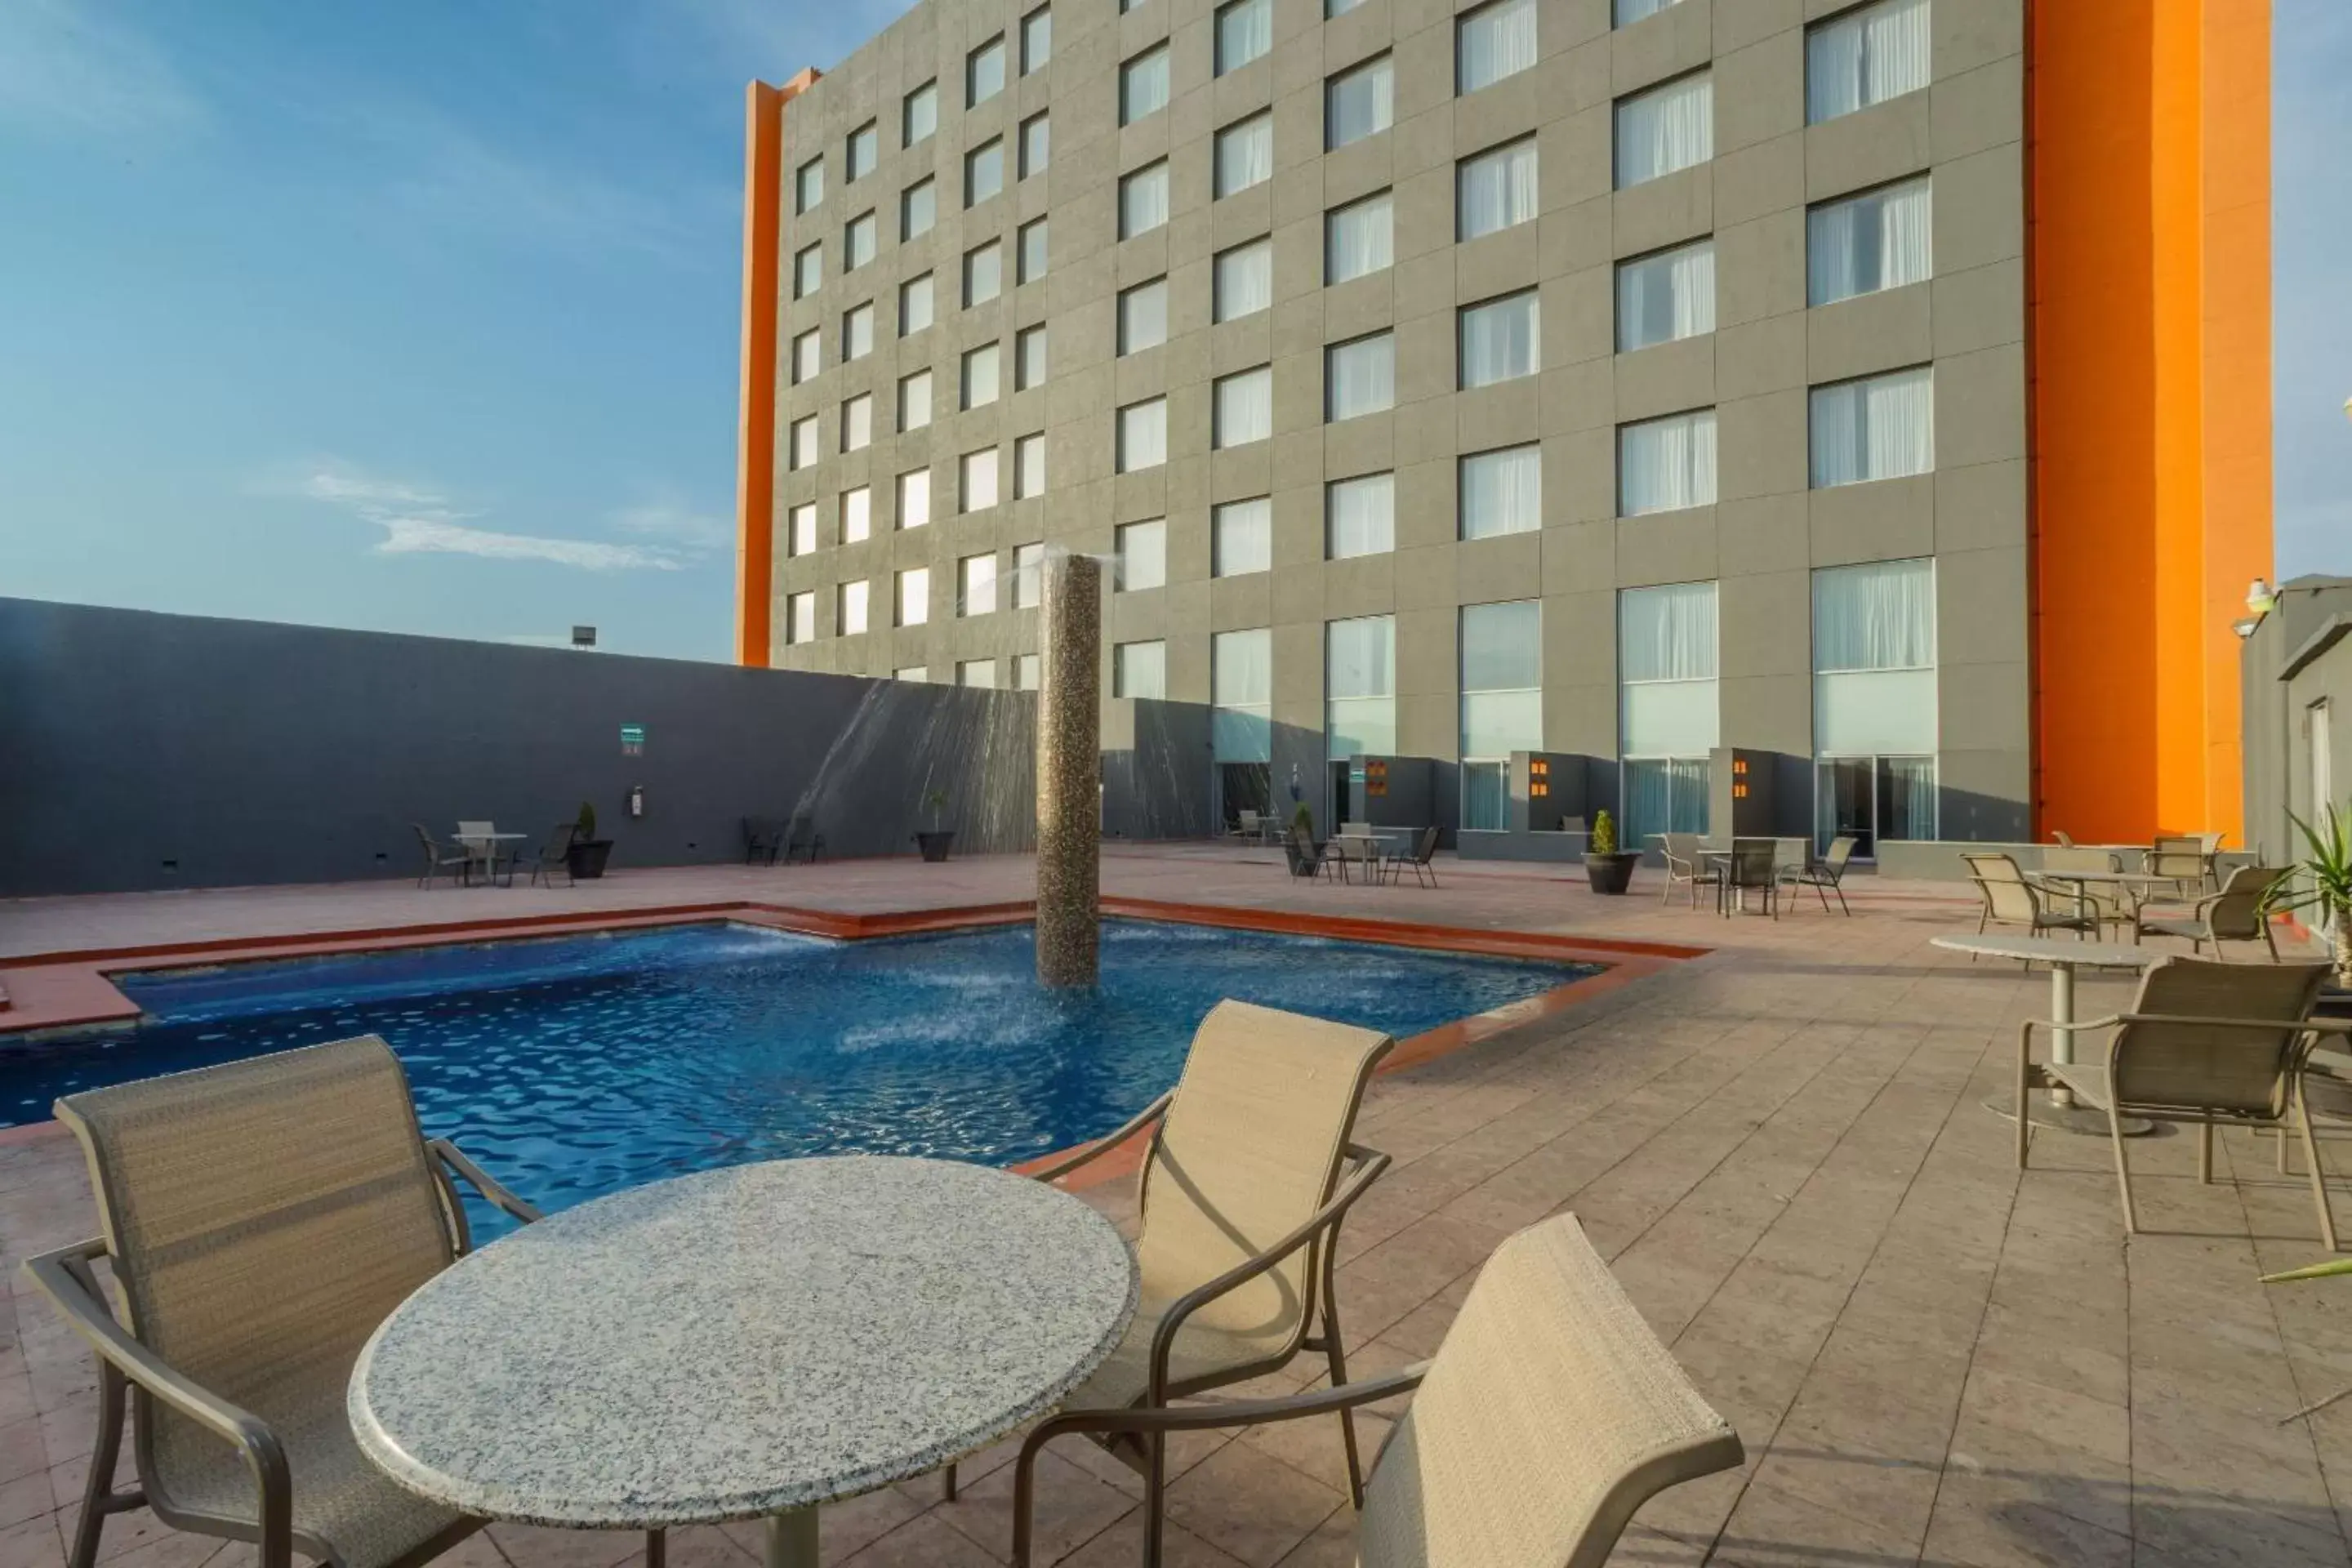 Swimming Pool in Real Inn Ciudad Juarez by the USA Consulate